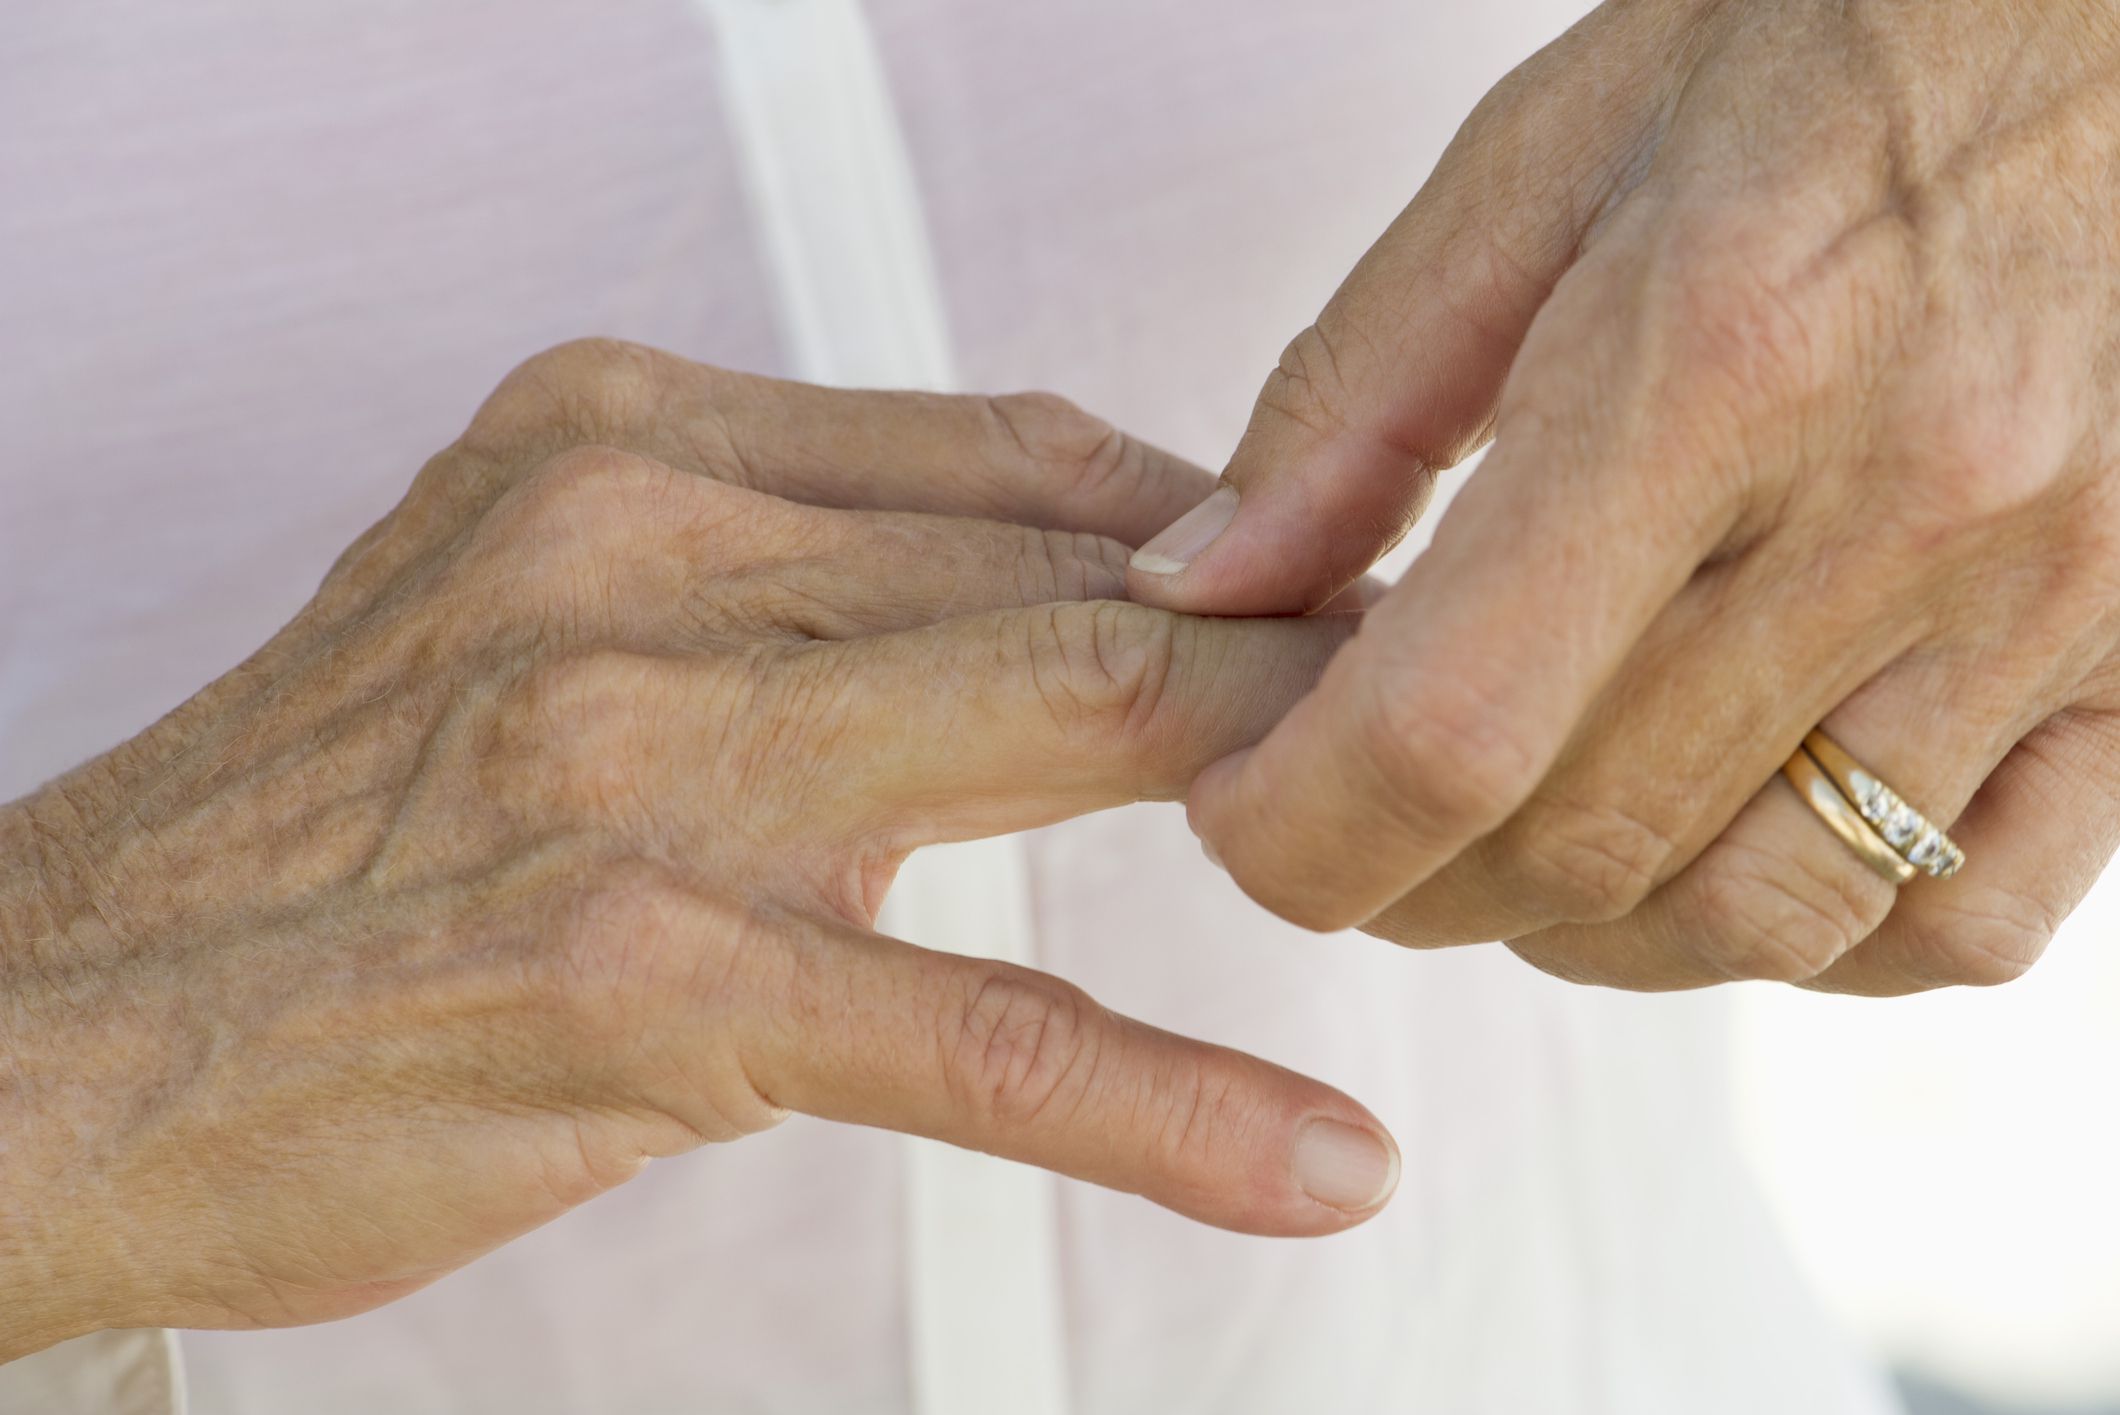 How to Get Rid of Arthritis in Fingers